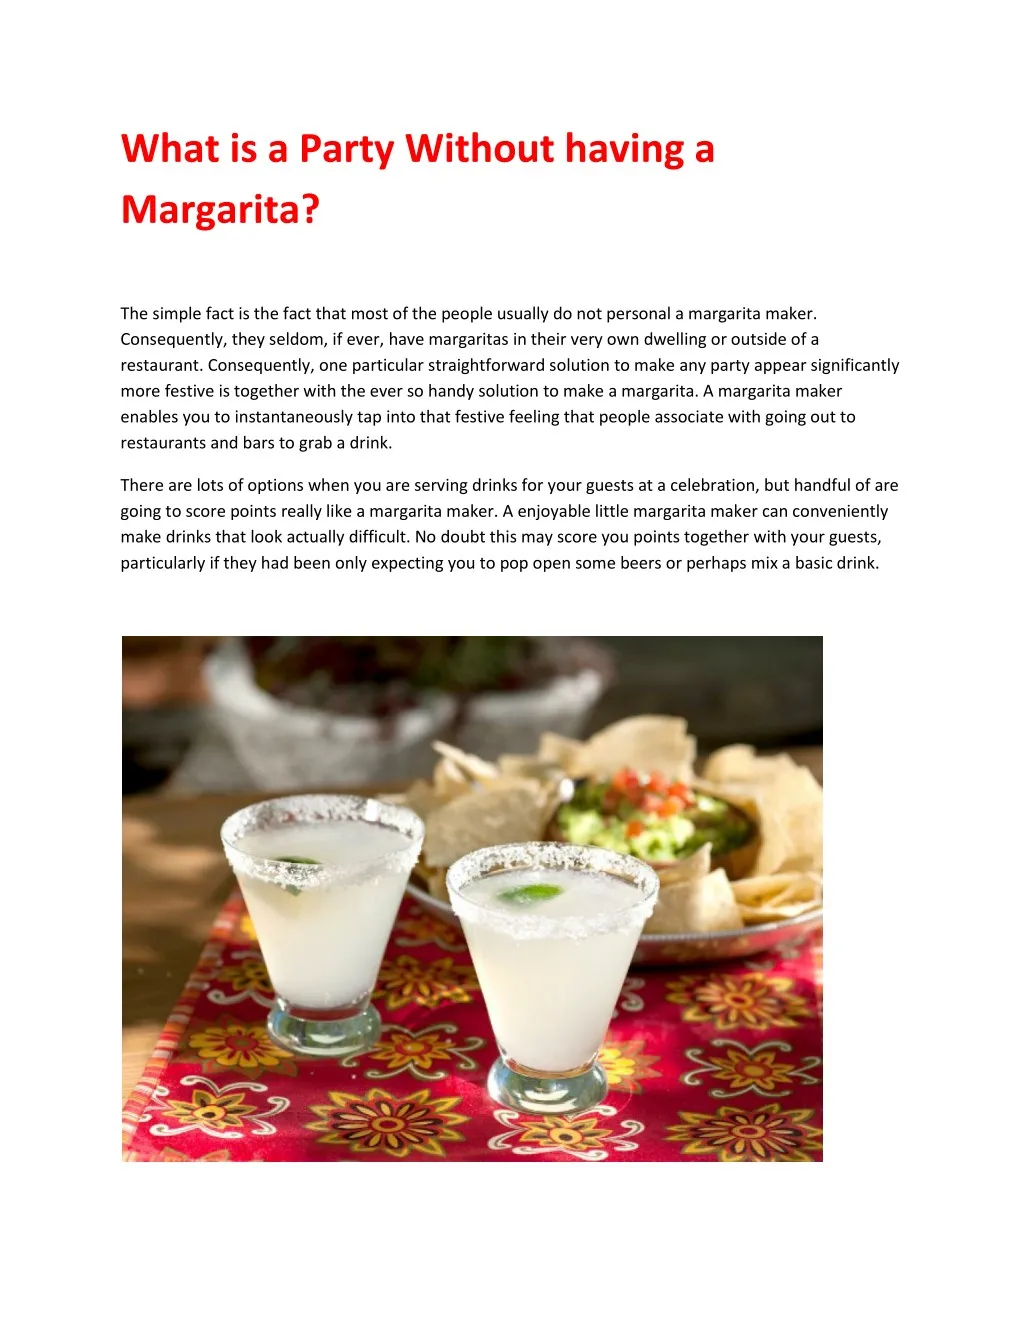 what is a party without having a margarita